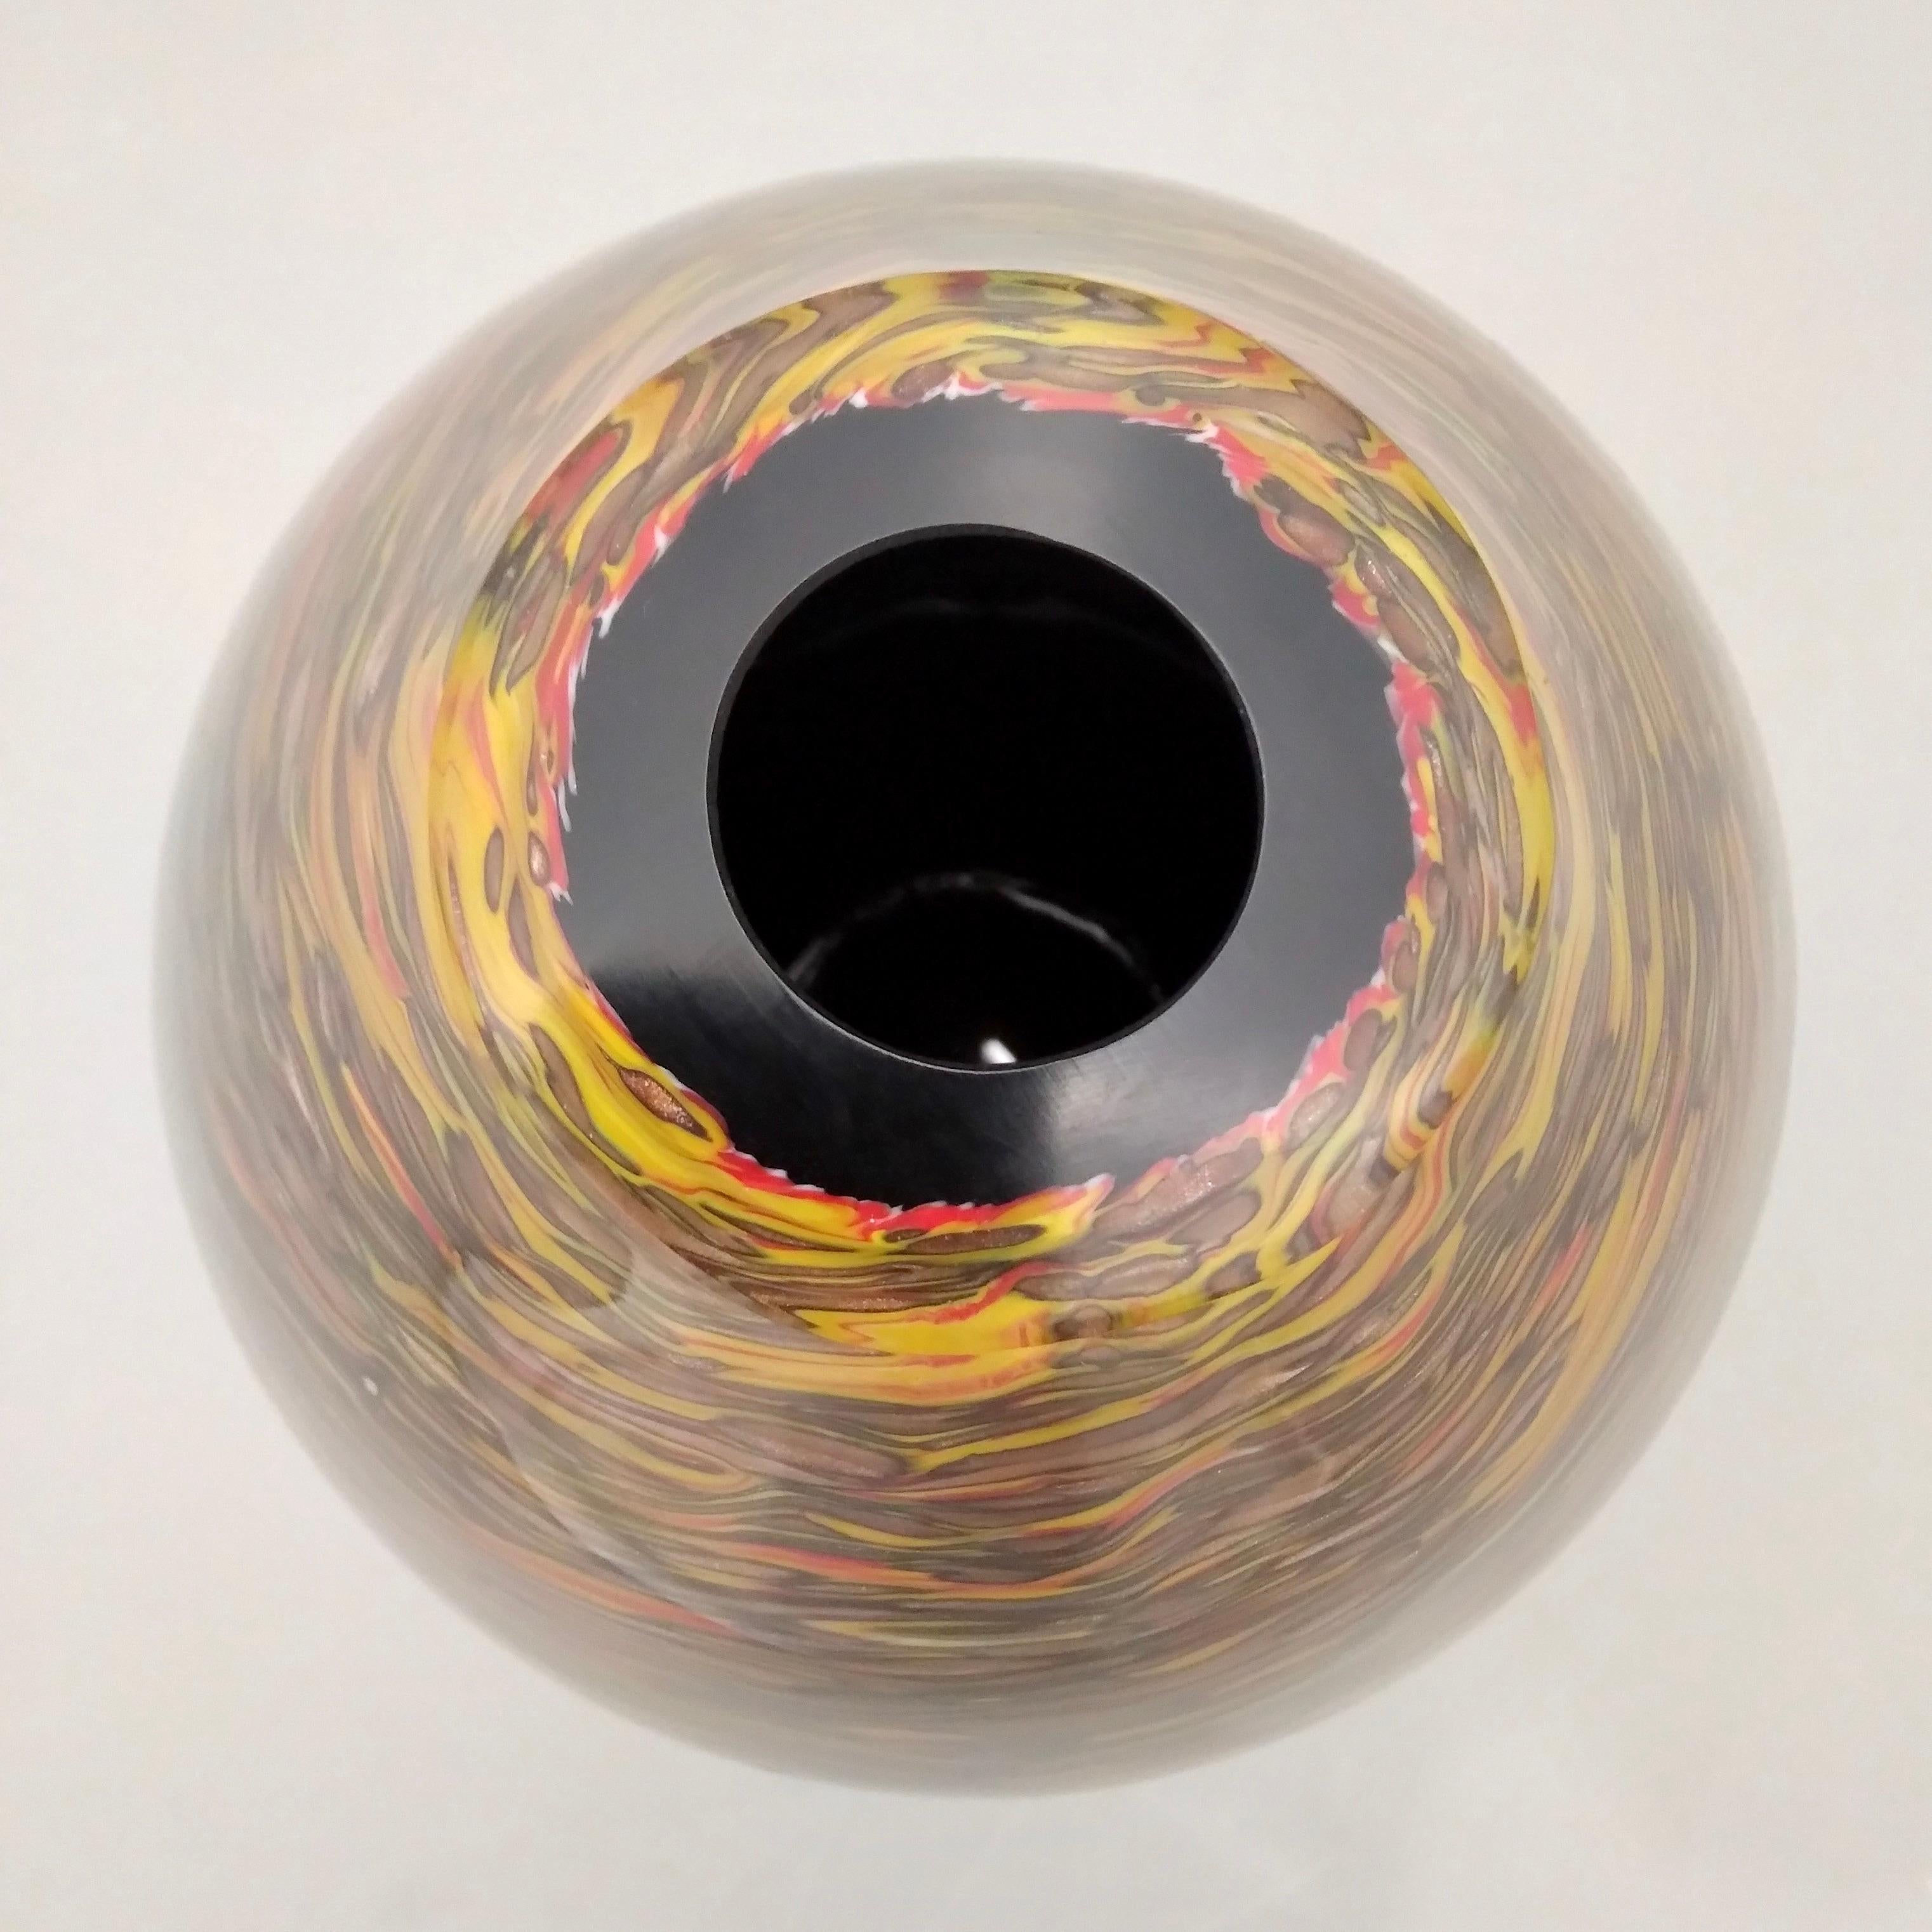 A striking ovoid vase, precious Works of Art in blown solid black Murano glass worked like a modern painting with a sophisticated extensive organic firey decor of overlaid elongated murrine in brown, green, yellow, orange, red colors interspersed